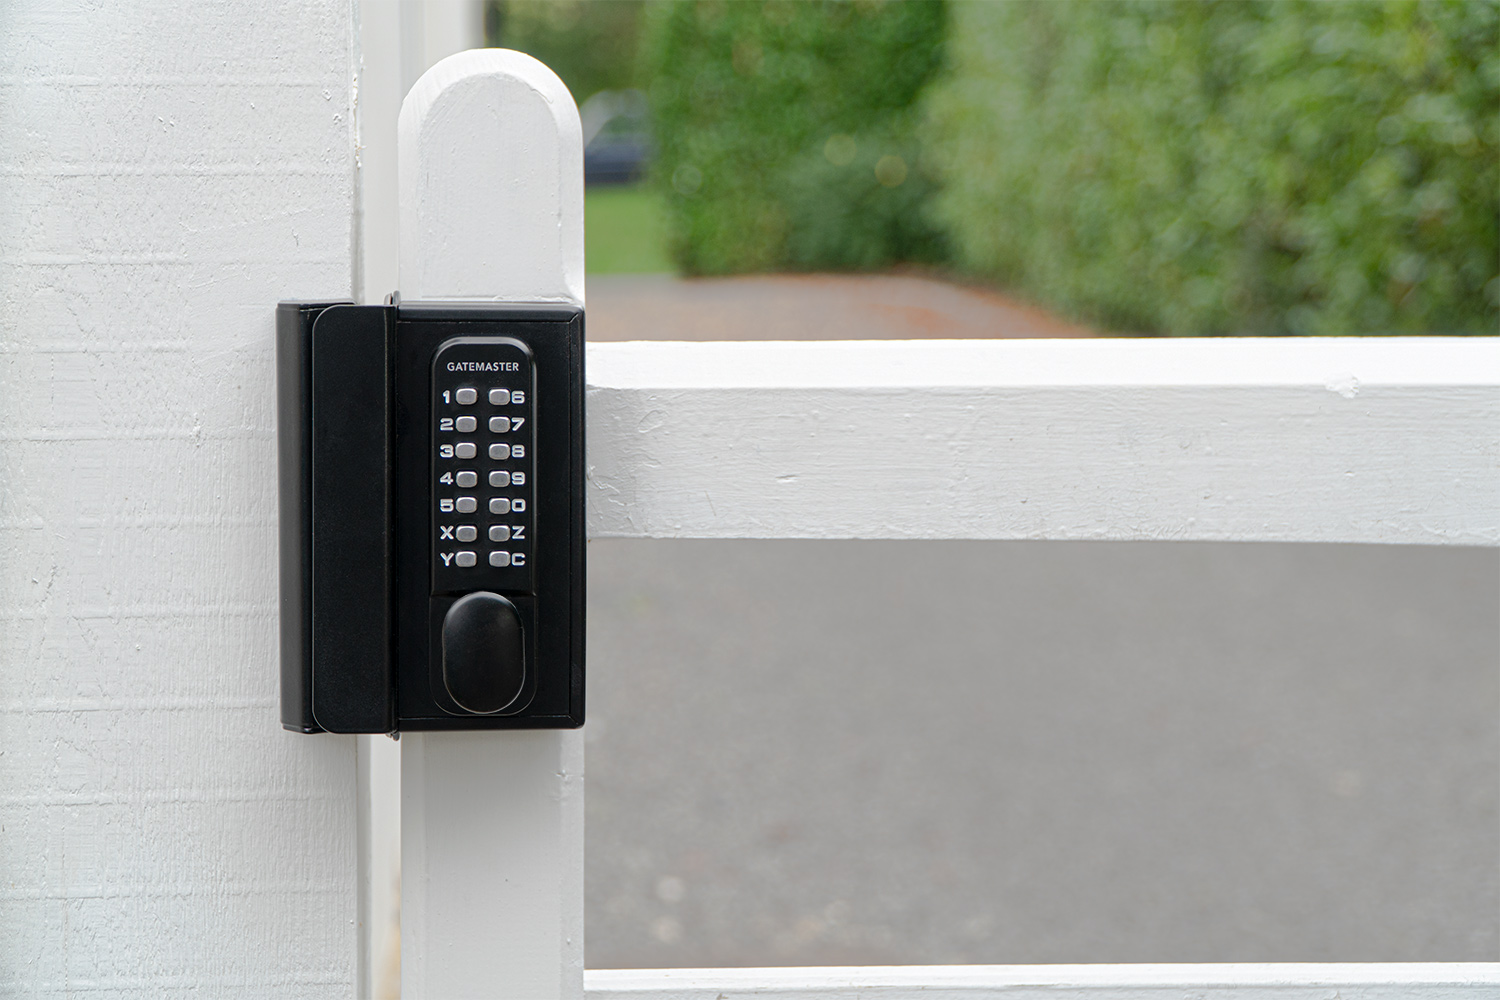 Front of digital keypad lock with 14 digit keypad. Lock is fixed to white wooden garden gate